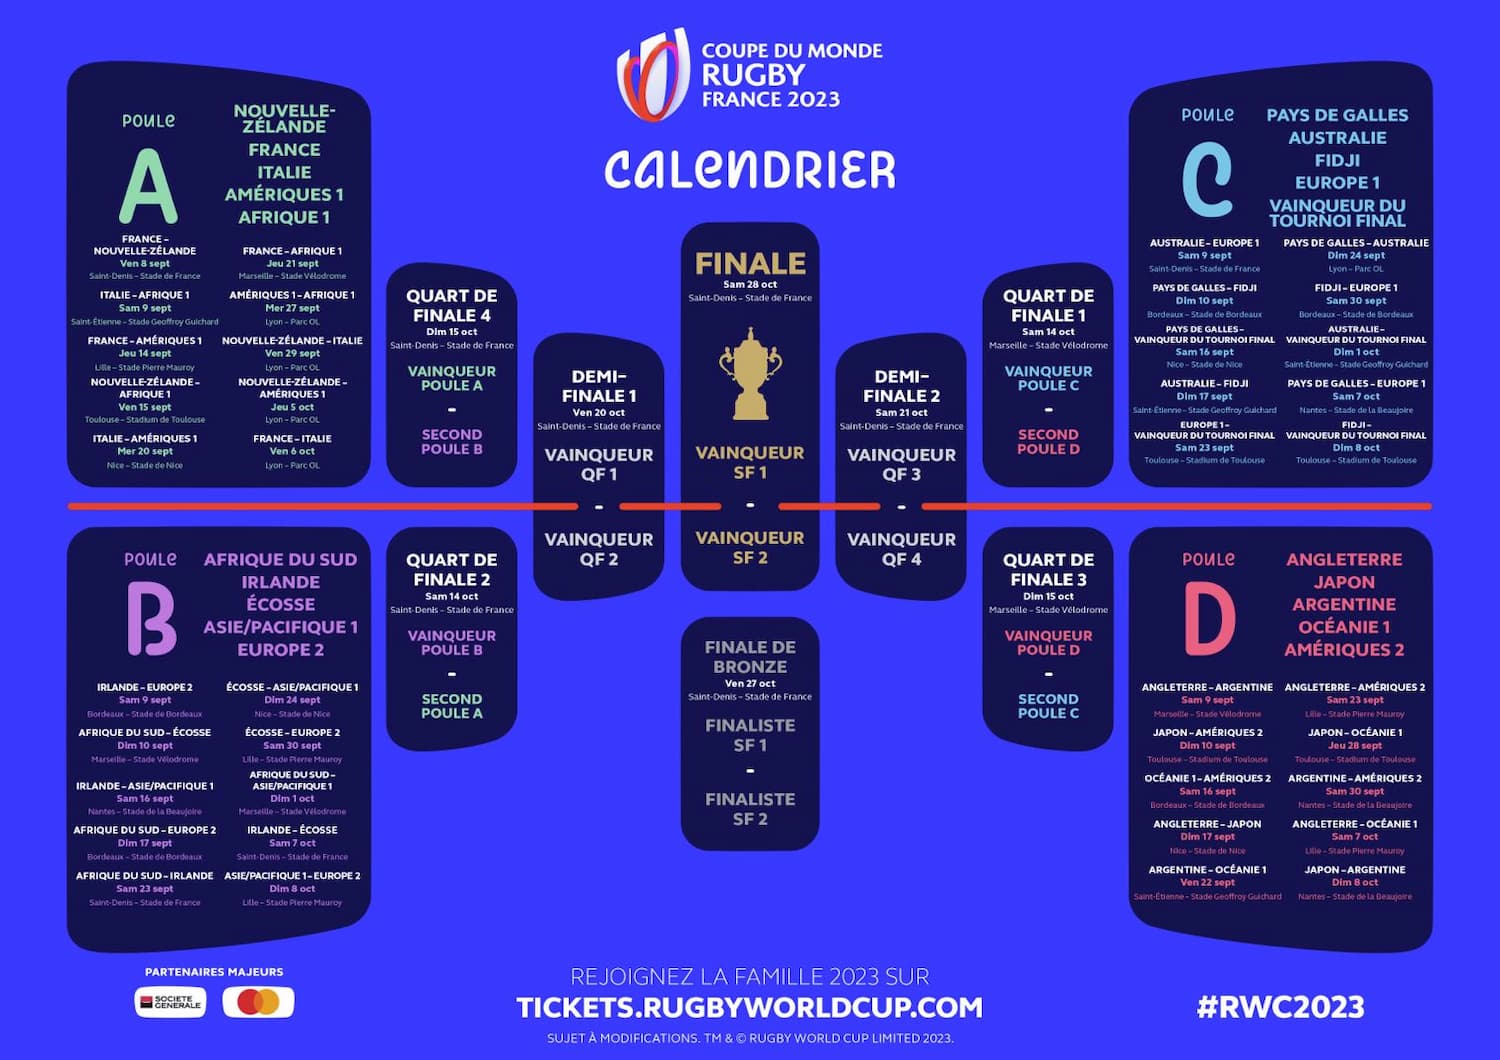 Match Schedule For Rugby World Cup 2023 Asia Rugby Images and Photos